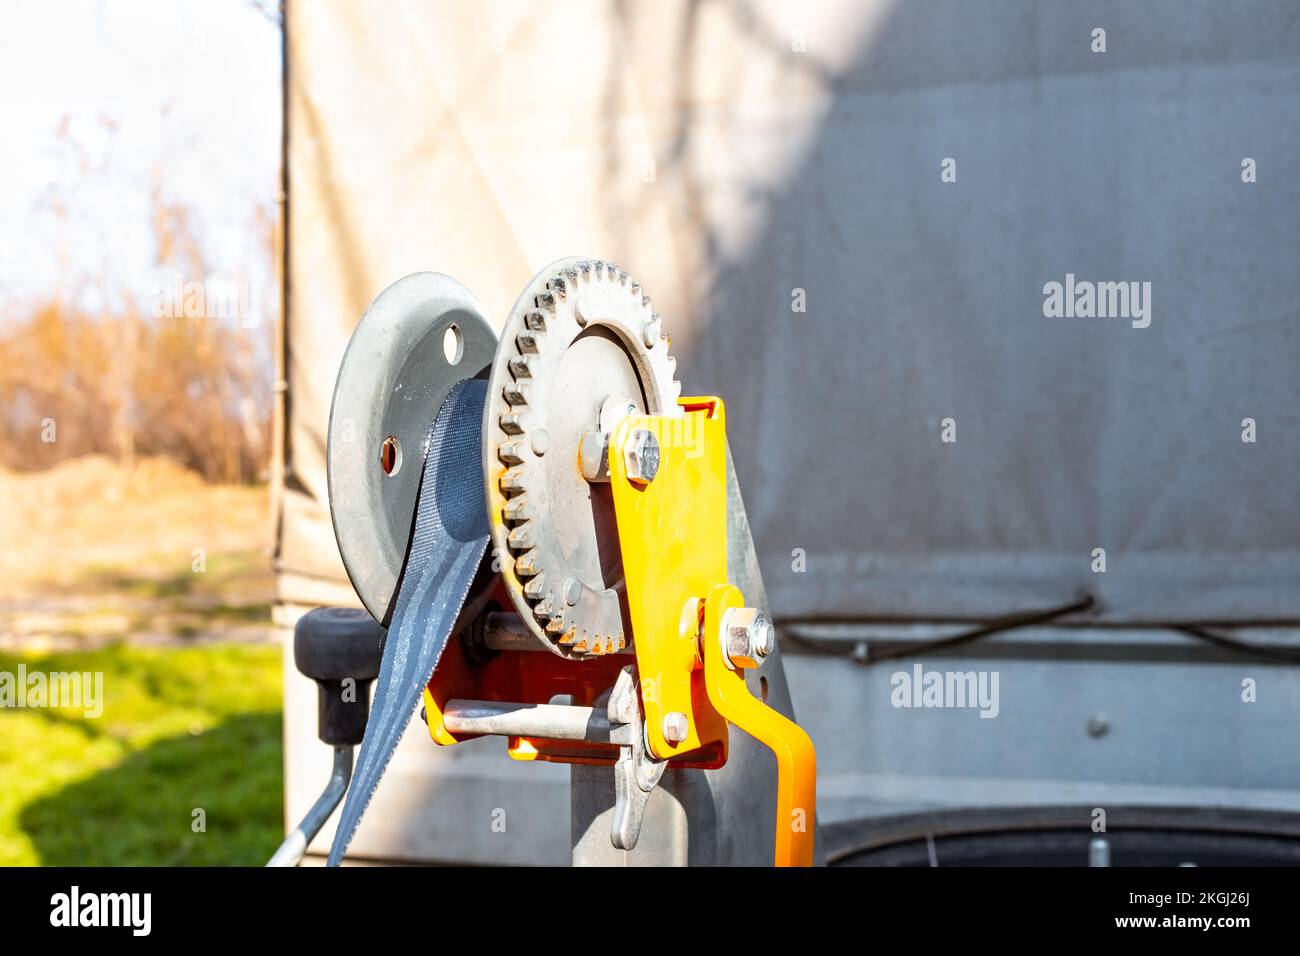 Towing winch on a trailer. Transportation and movement of vehicles. Stock Photo